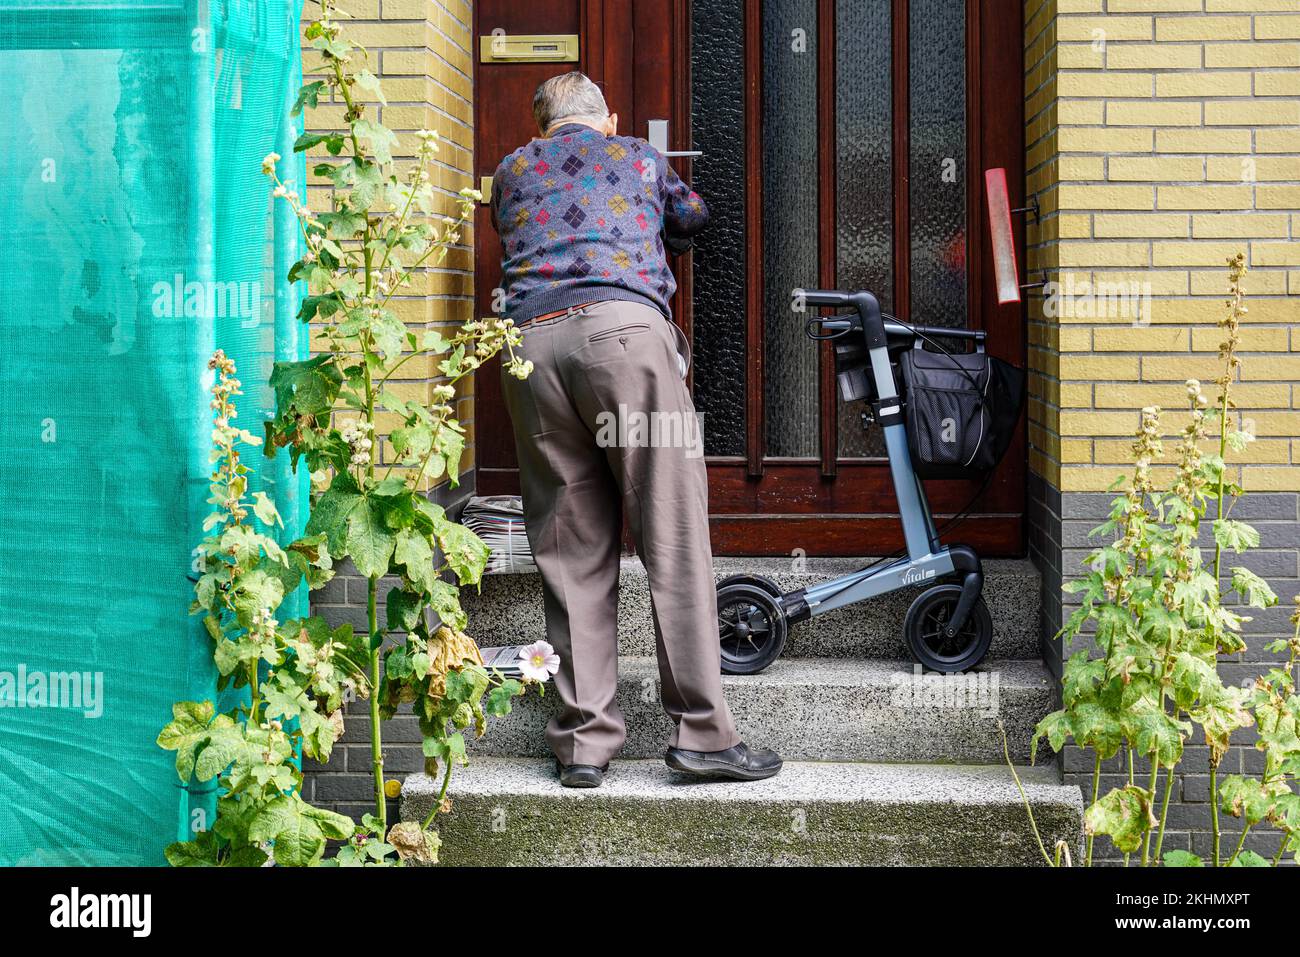 An elderly gentleman with a walking disability has to go up three steps to unlock his apartment door. He has already carried his walker up the steps. Stock Photo